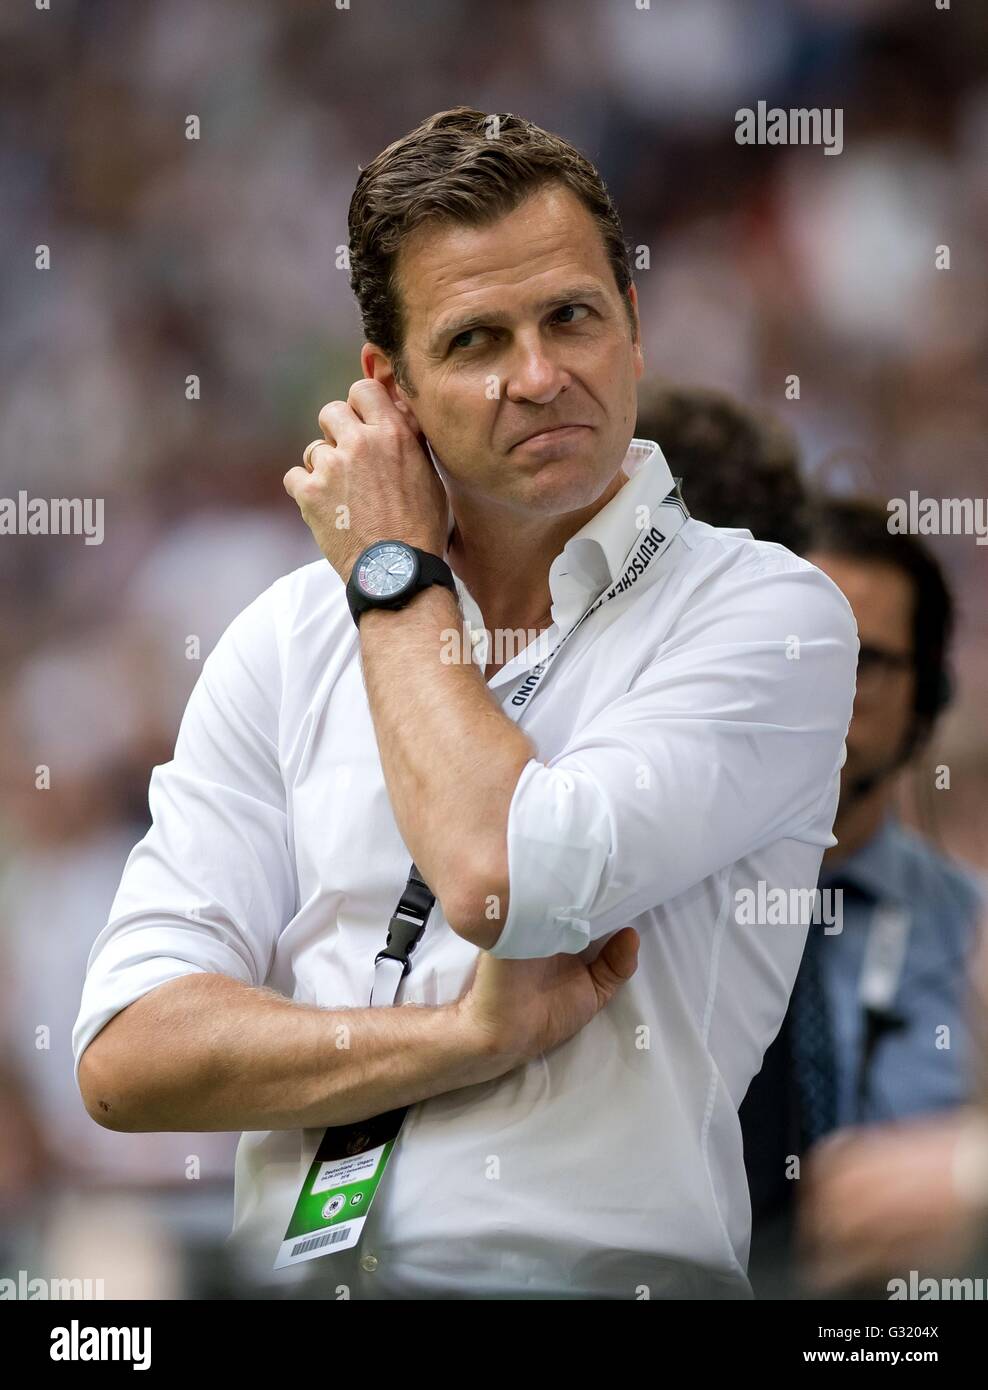 Gelsenkirchen, Germany. 04th June, 2016. Germany's team manager Oliver Bierhoff at the international soccer friendly match between Germany and Hungary at the Veltins Arena in Gelsenkirchen, Germany, 04 June 2016. Photo: THOMAS EISENHUTH/dpa - NO WIRE SERVICE -/dpa/Alamy Live News Stock Photo